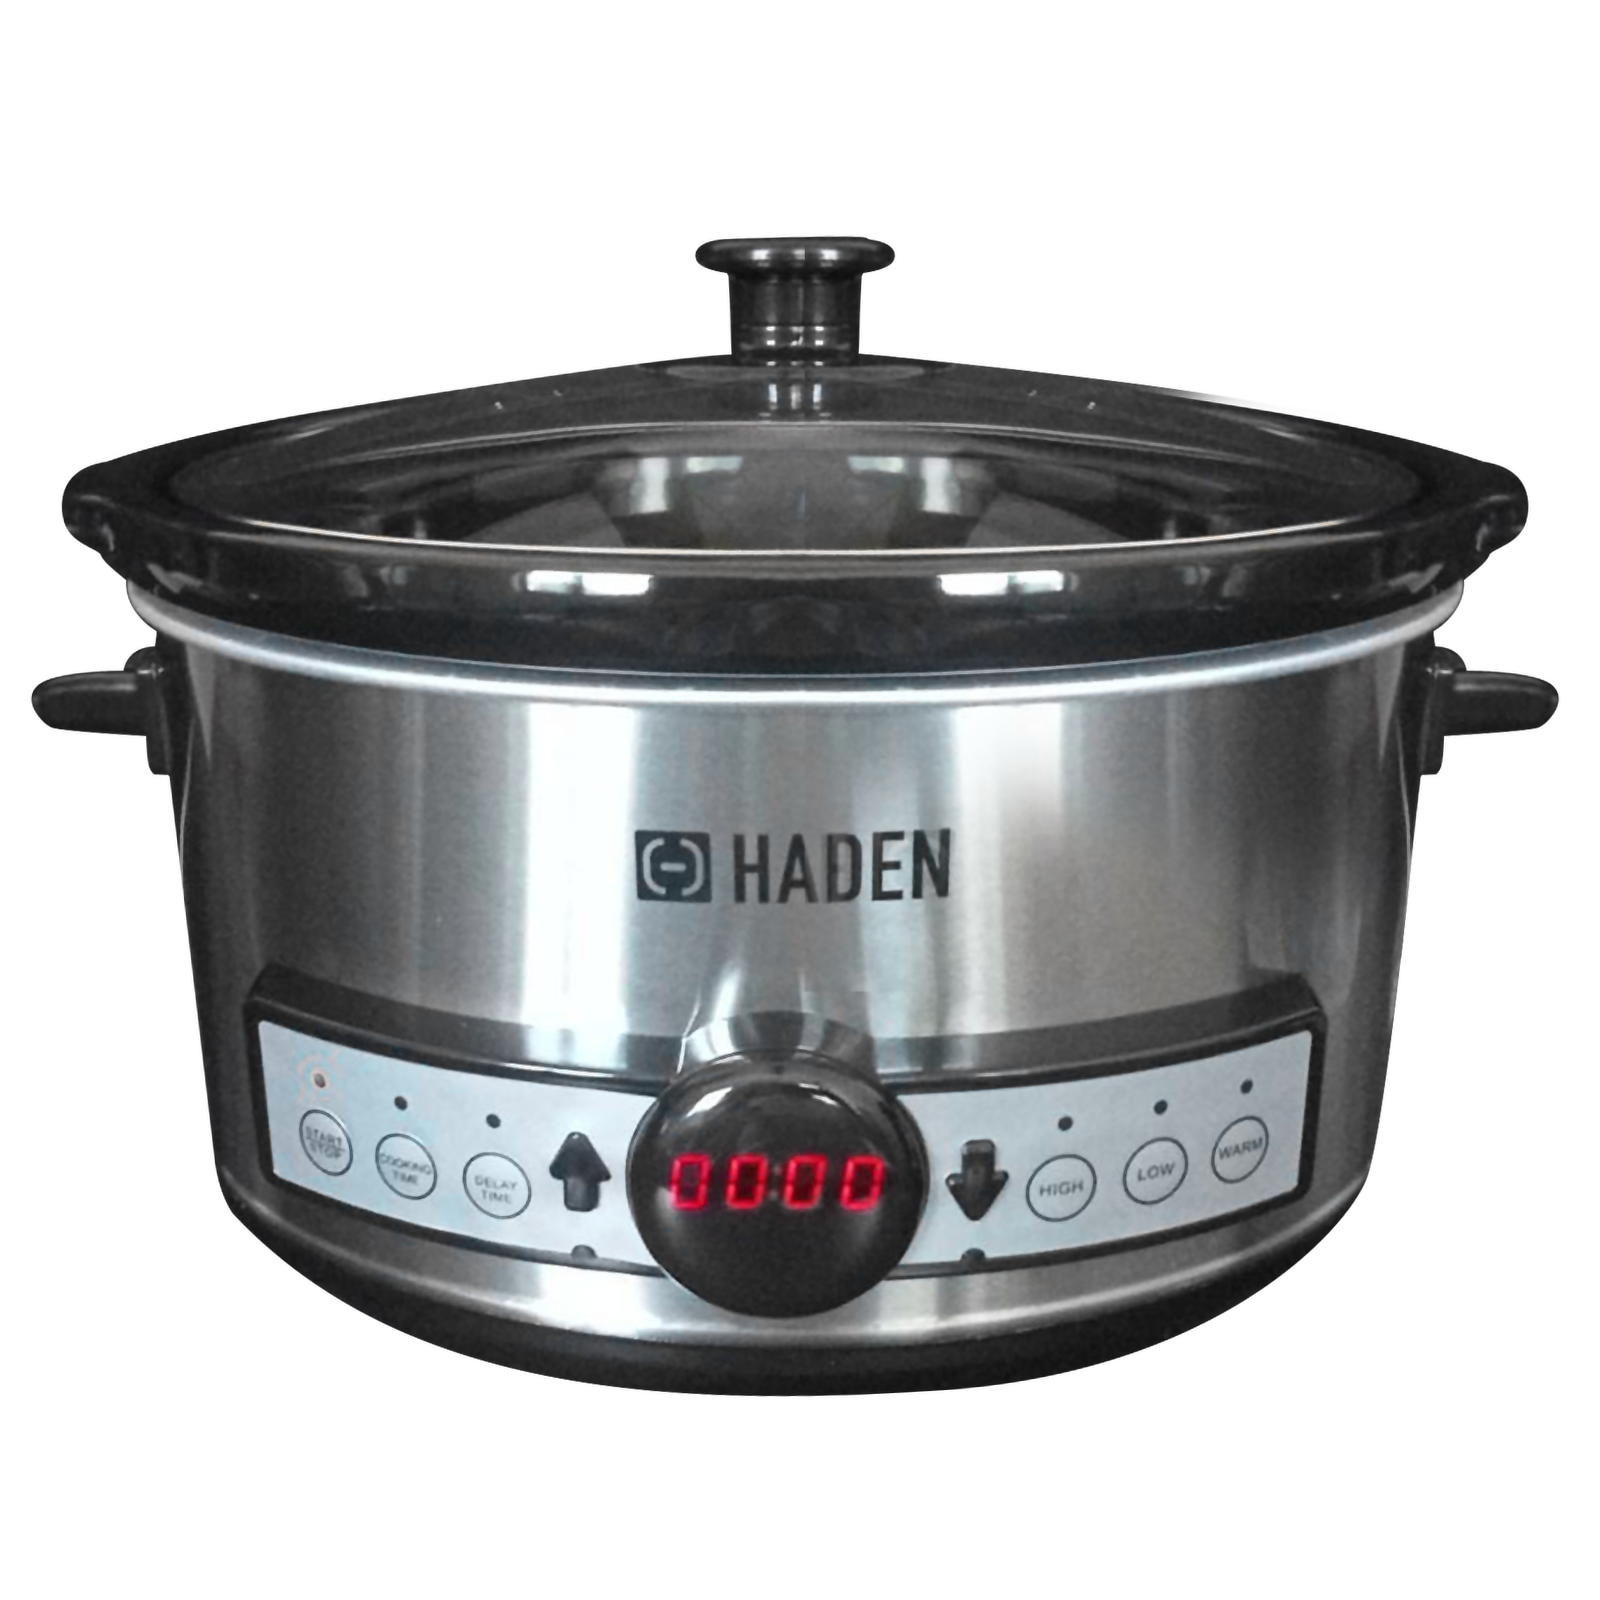 HADEN 3.5 Litre Electric Slow Cooker with Power Light Indicator (Silver)